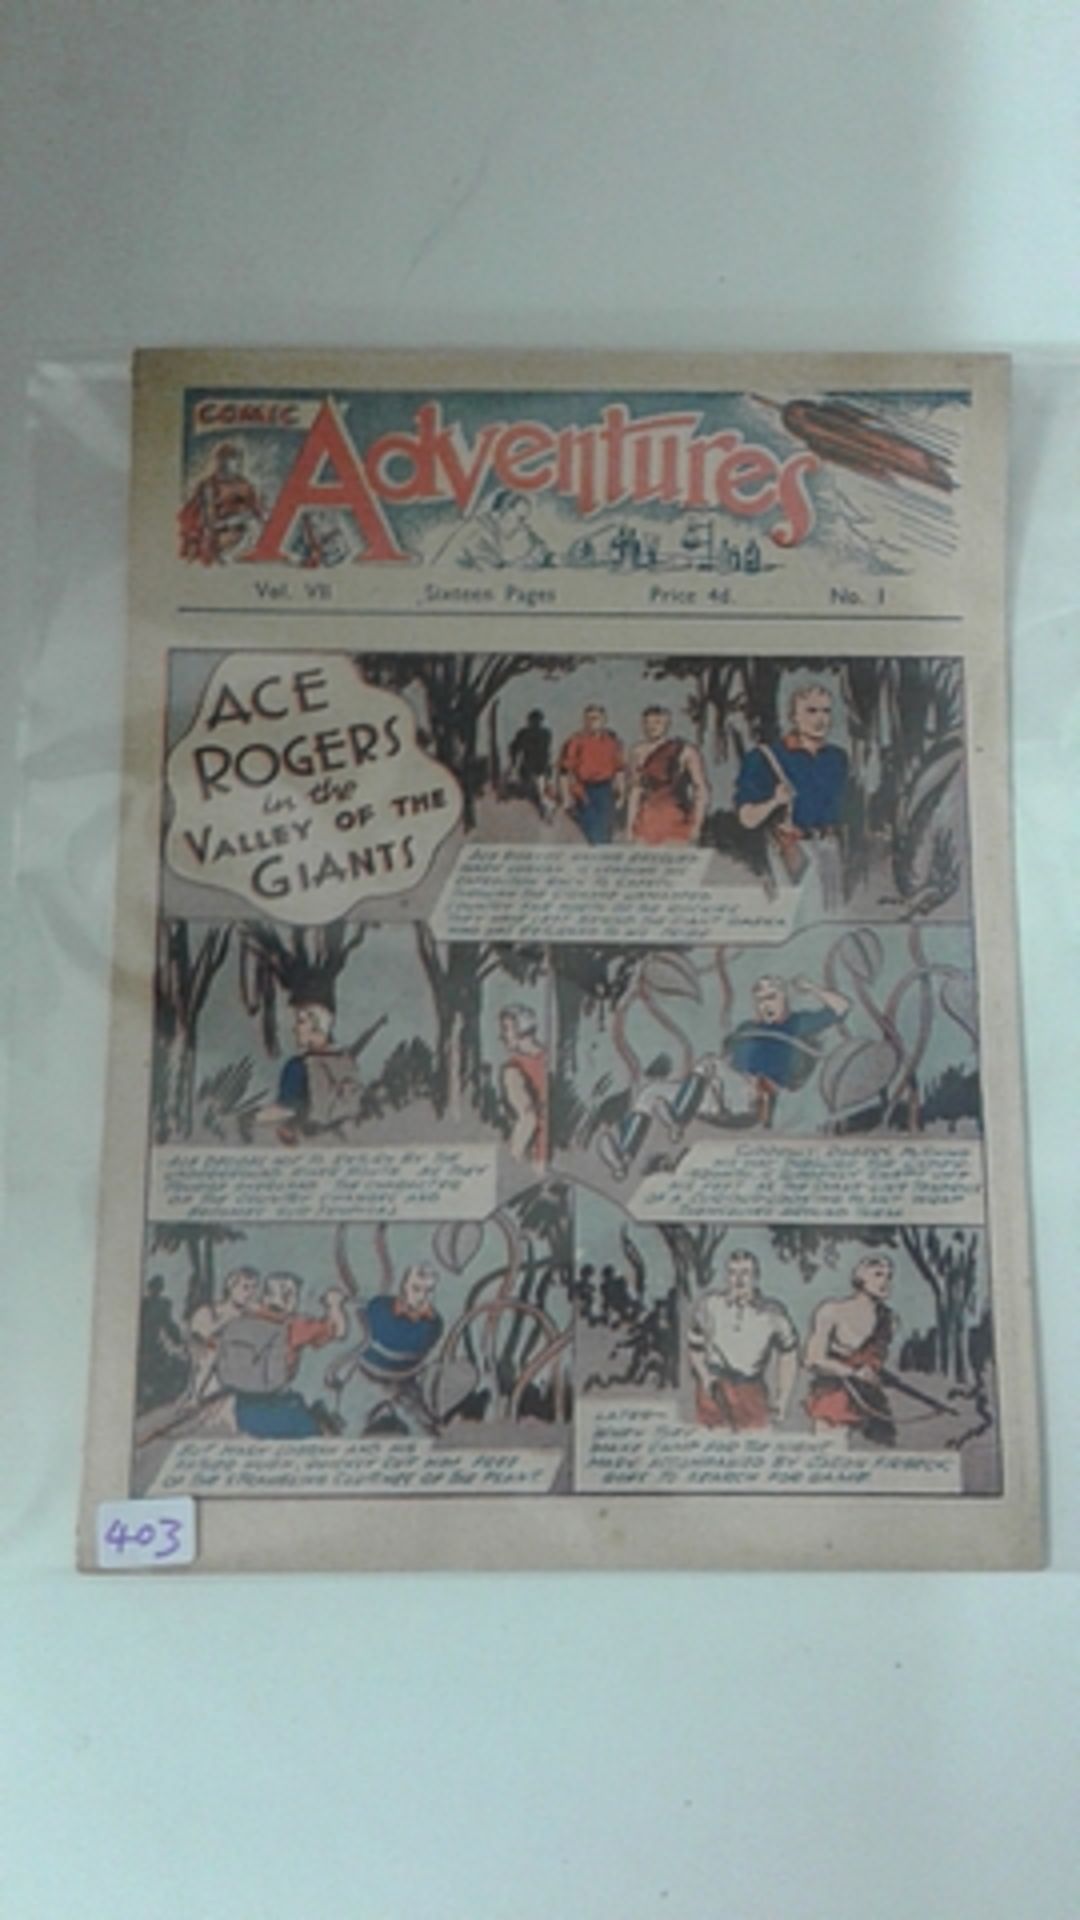 Comic Adventures Soloway, 1940 Series #V2/#1 Ace Rogers In The Valley Of The Giants (Location RG